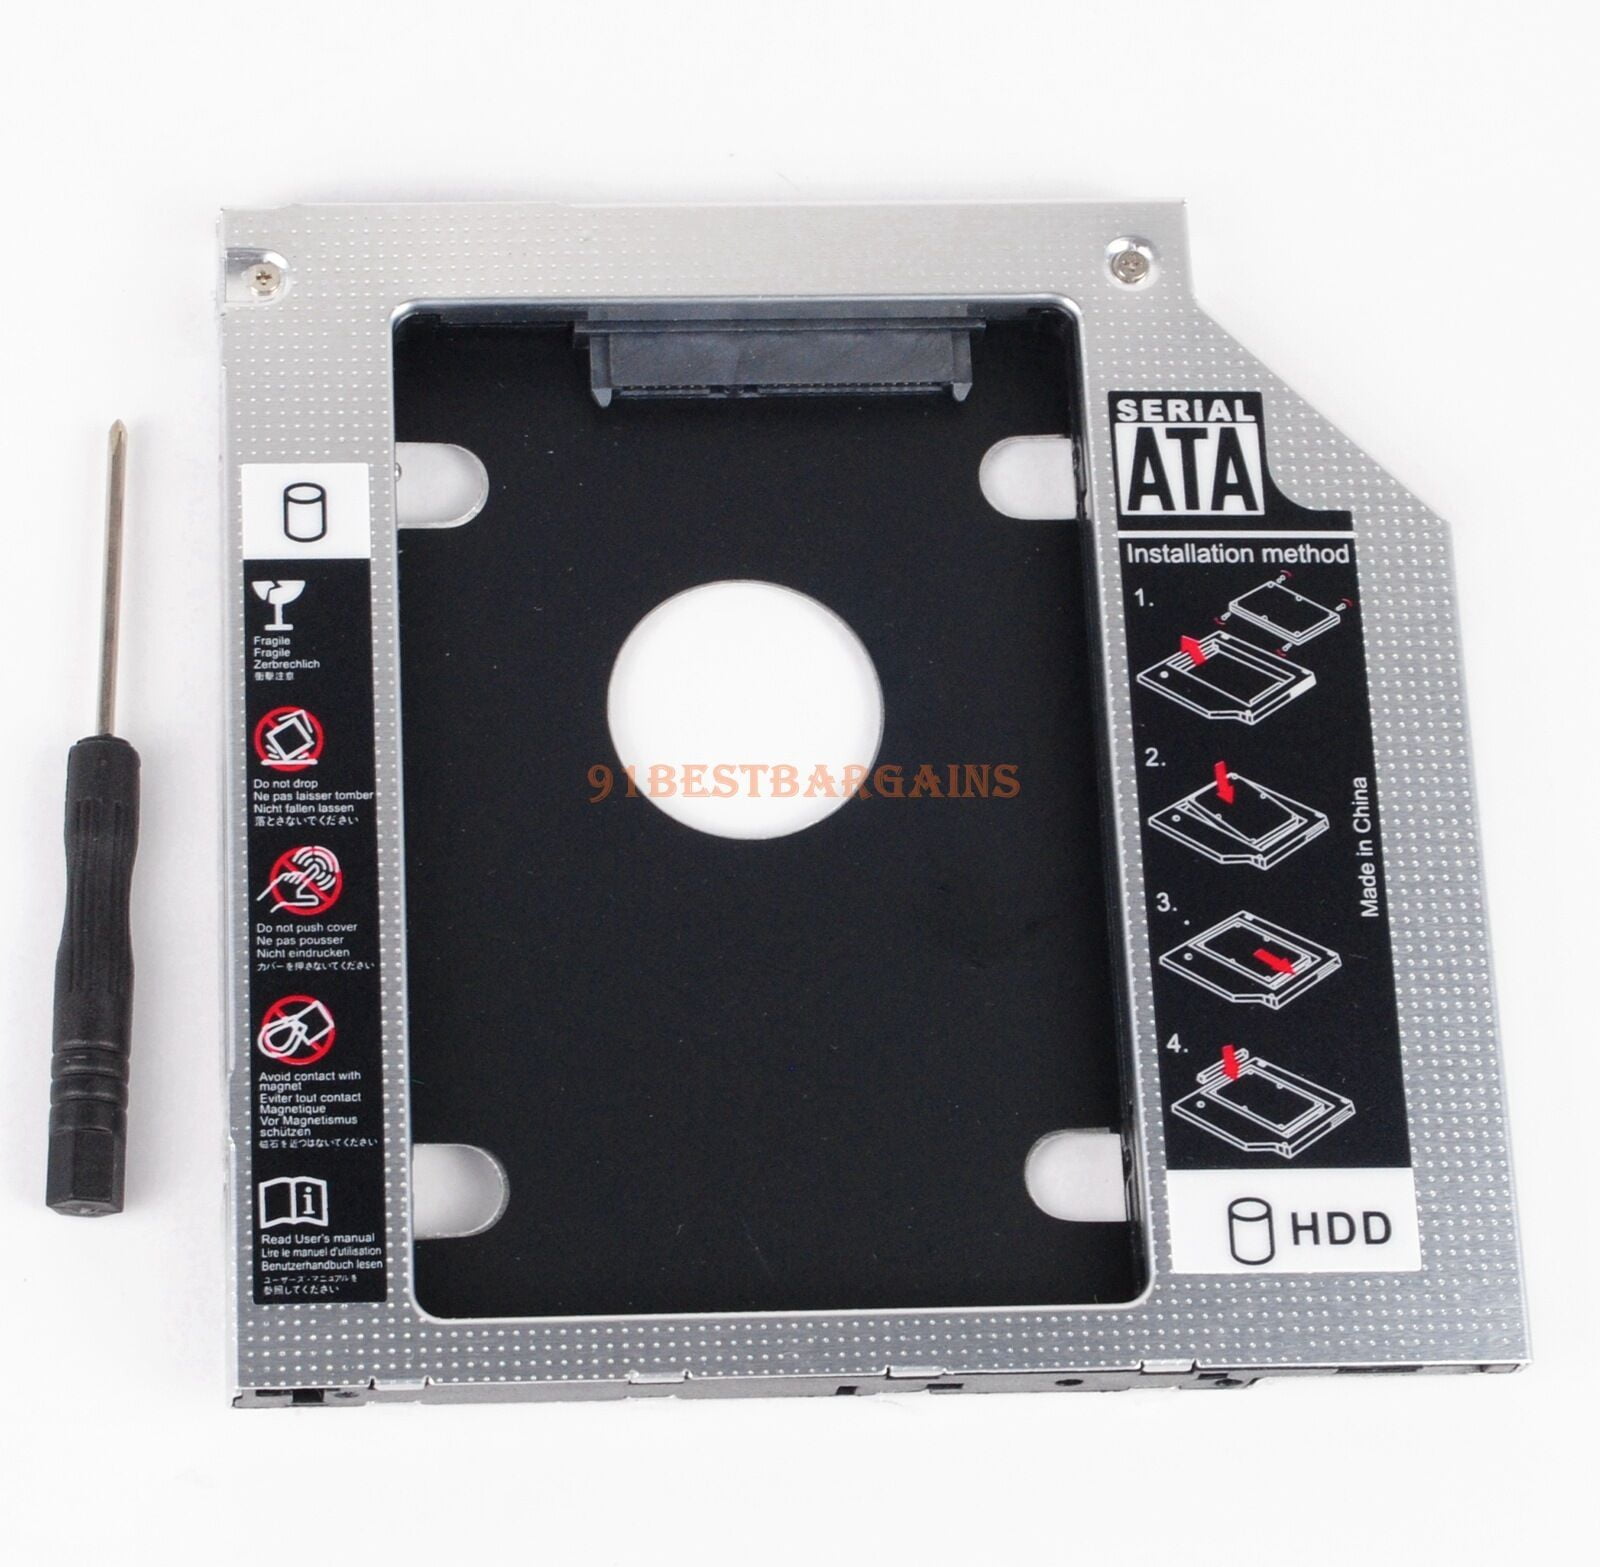 2nd Hard Drive HDD SSD Caddy for Toshiba Satellite P50 P50-A P50-B P50-C Series 